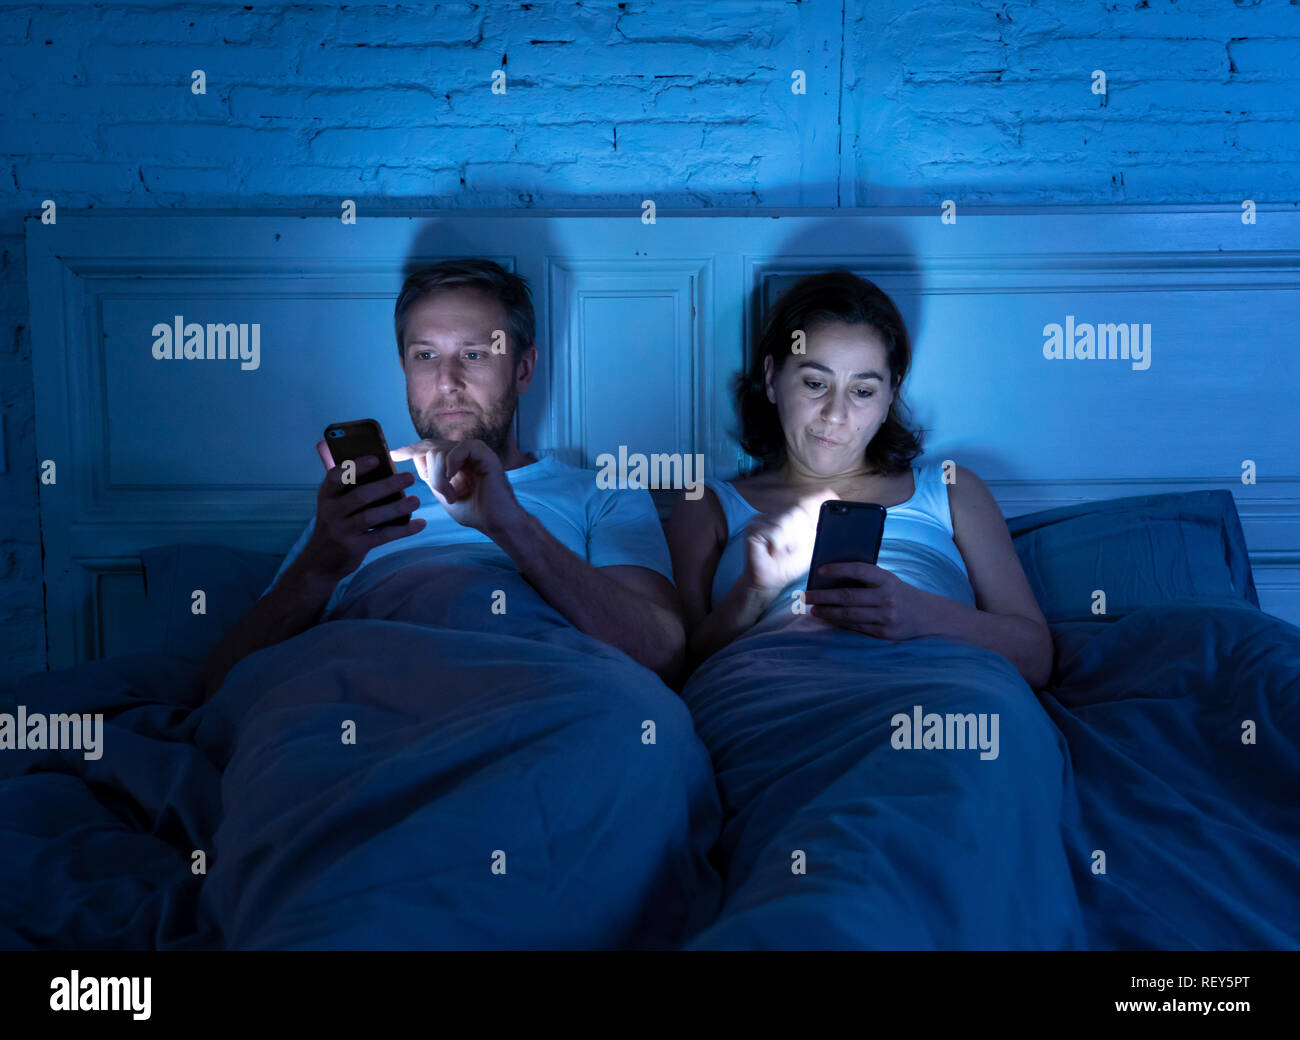 Young couple in bed late at night using smart phones obsessed with games, social media and apps ignoring each other in relationship communication prob Stock Photo